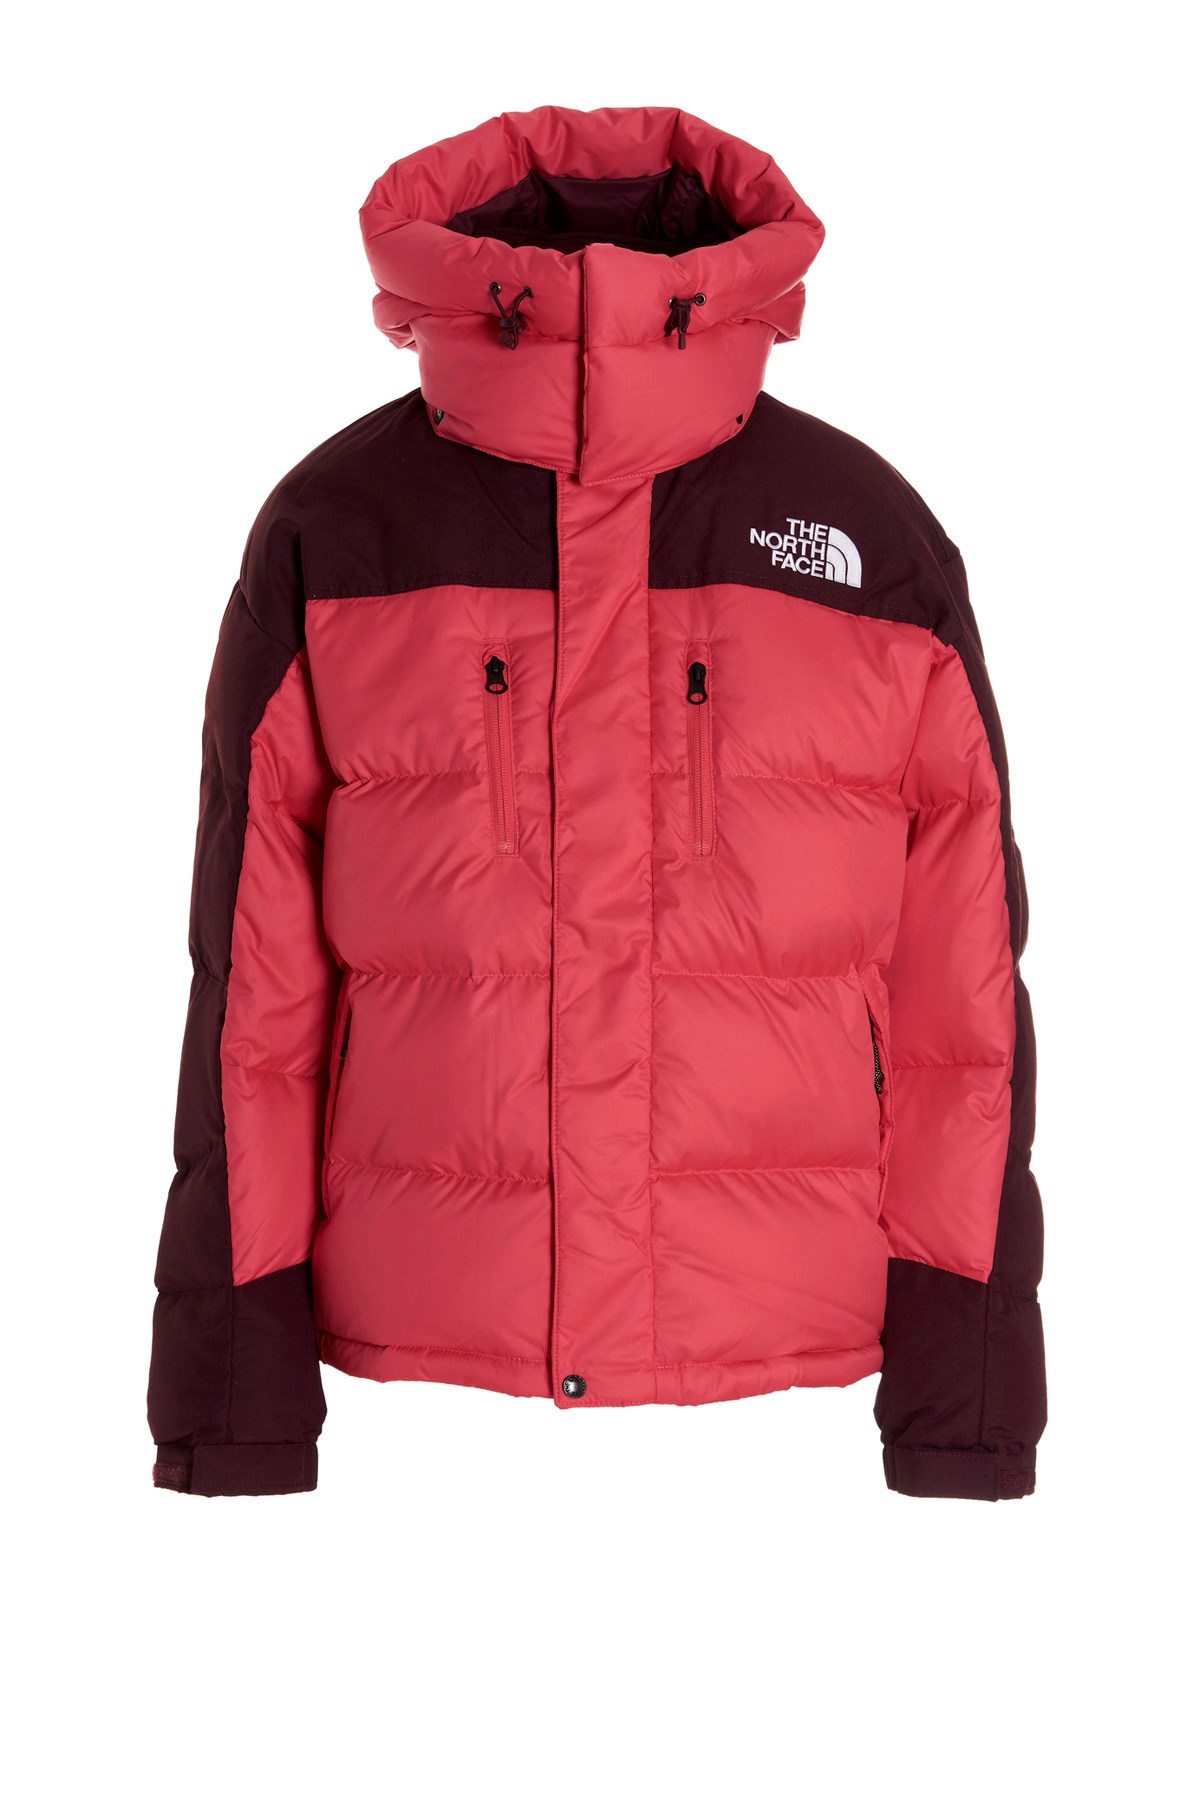 THE NORTH FACE 'Hmlyn Paradise’ Down Jacket